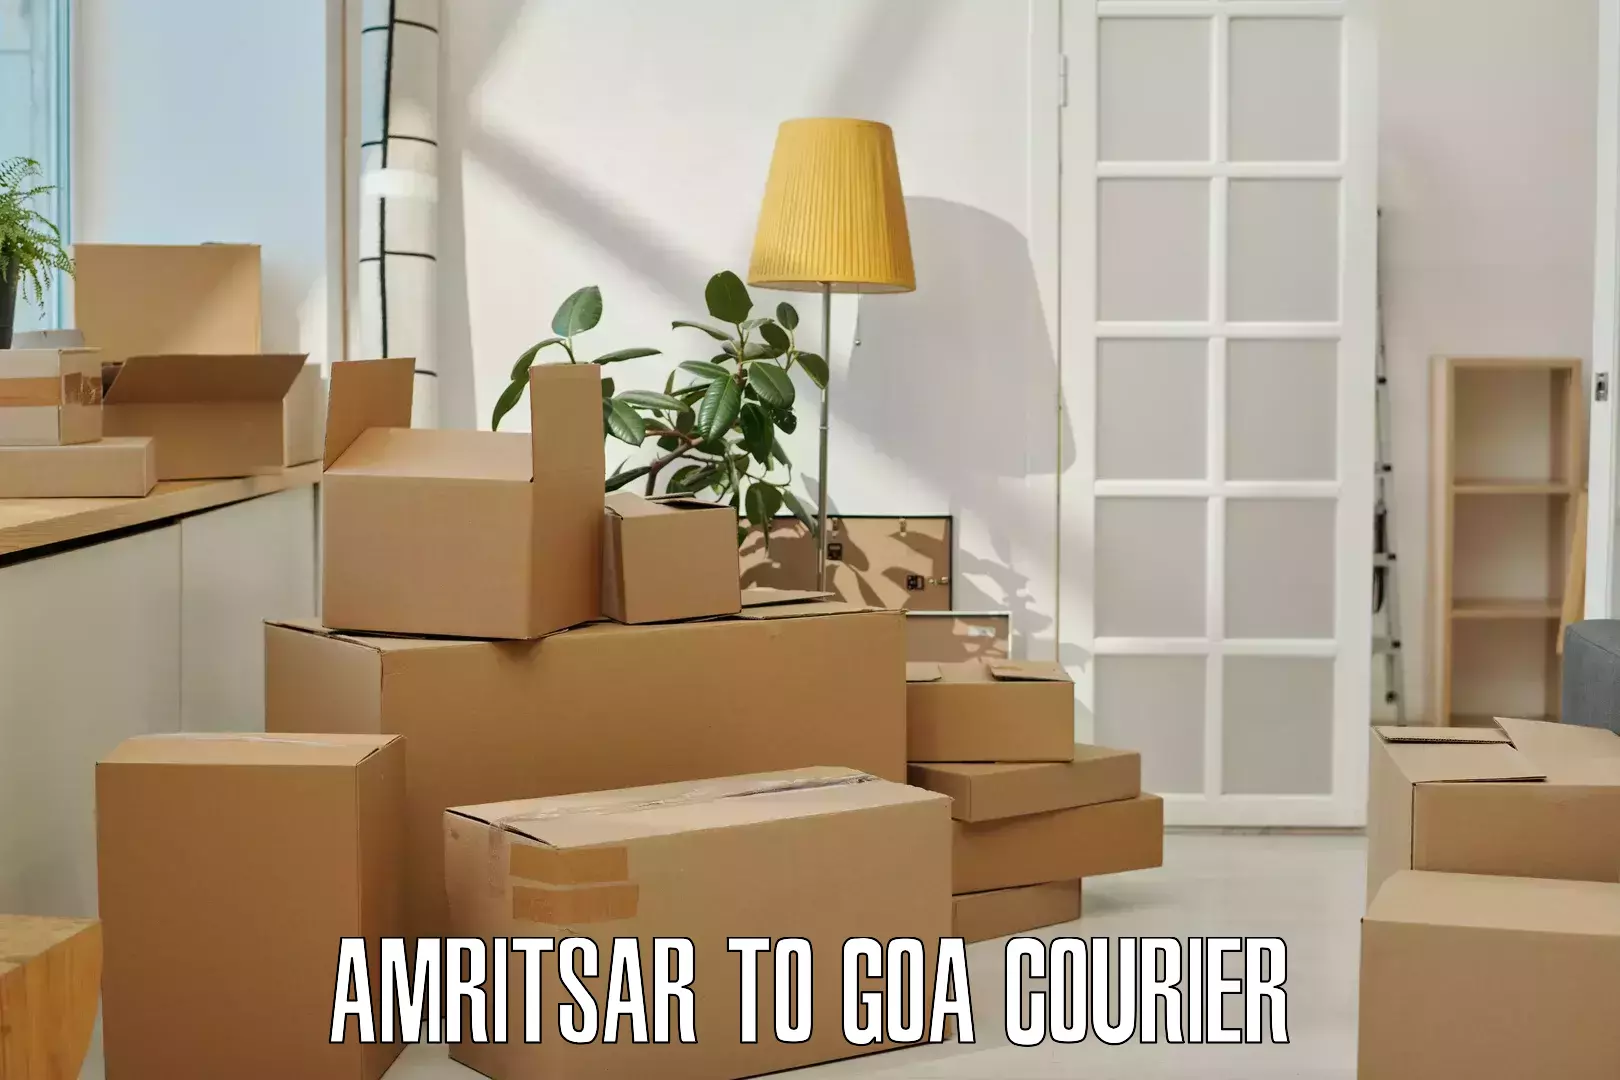 User-friendly delivery service Amritsar to Panaji